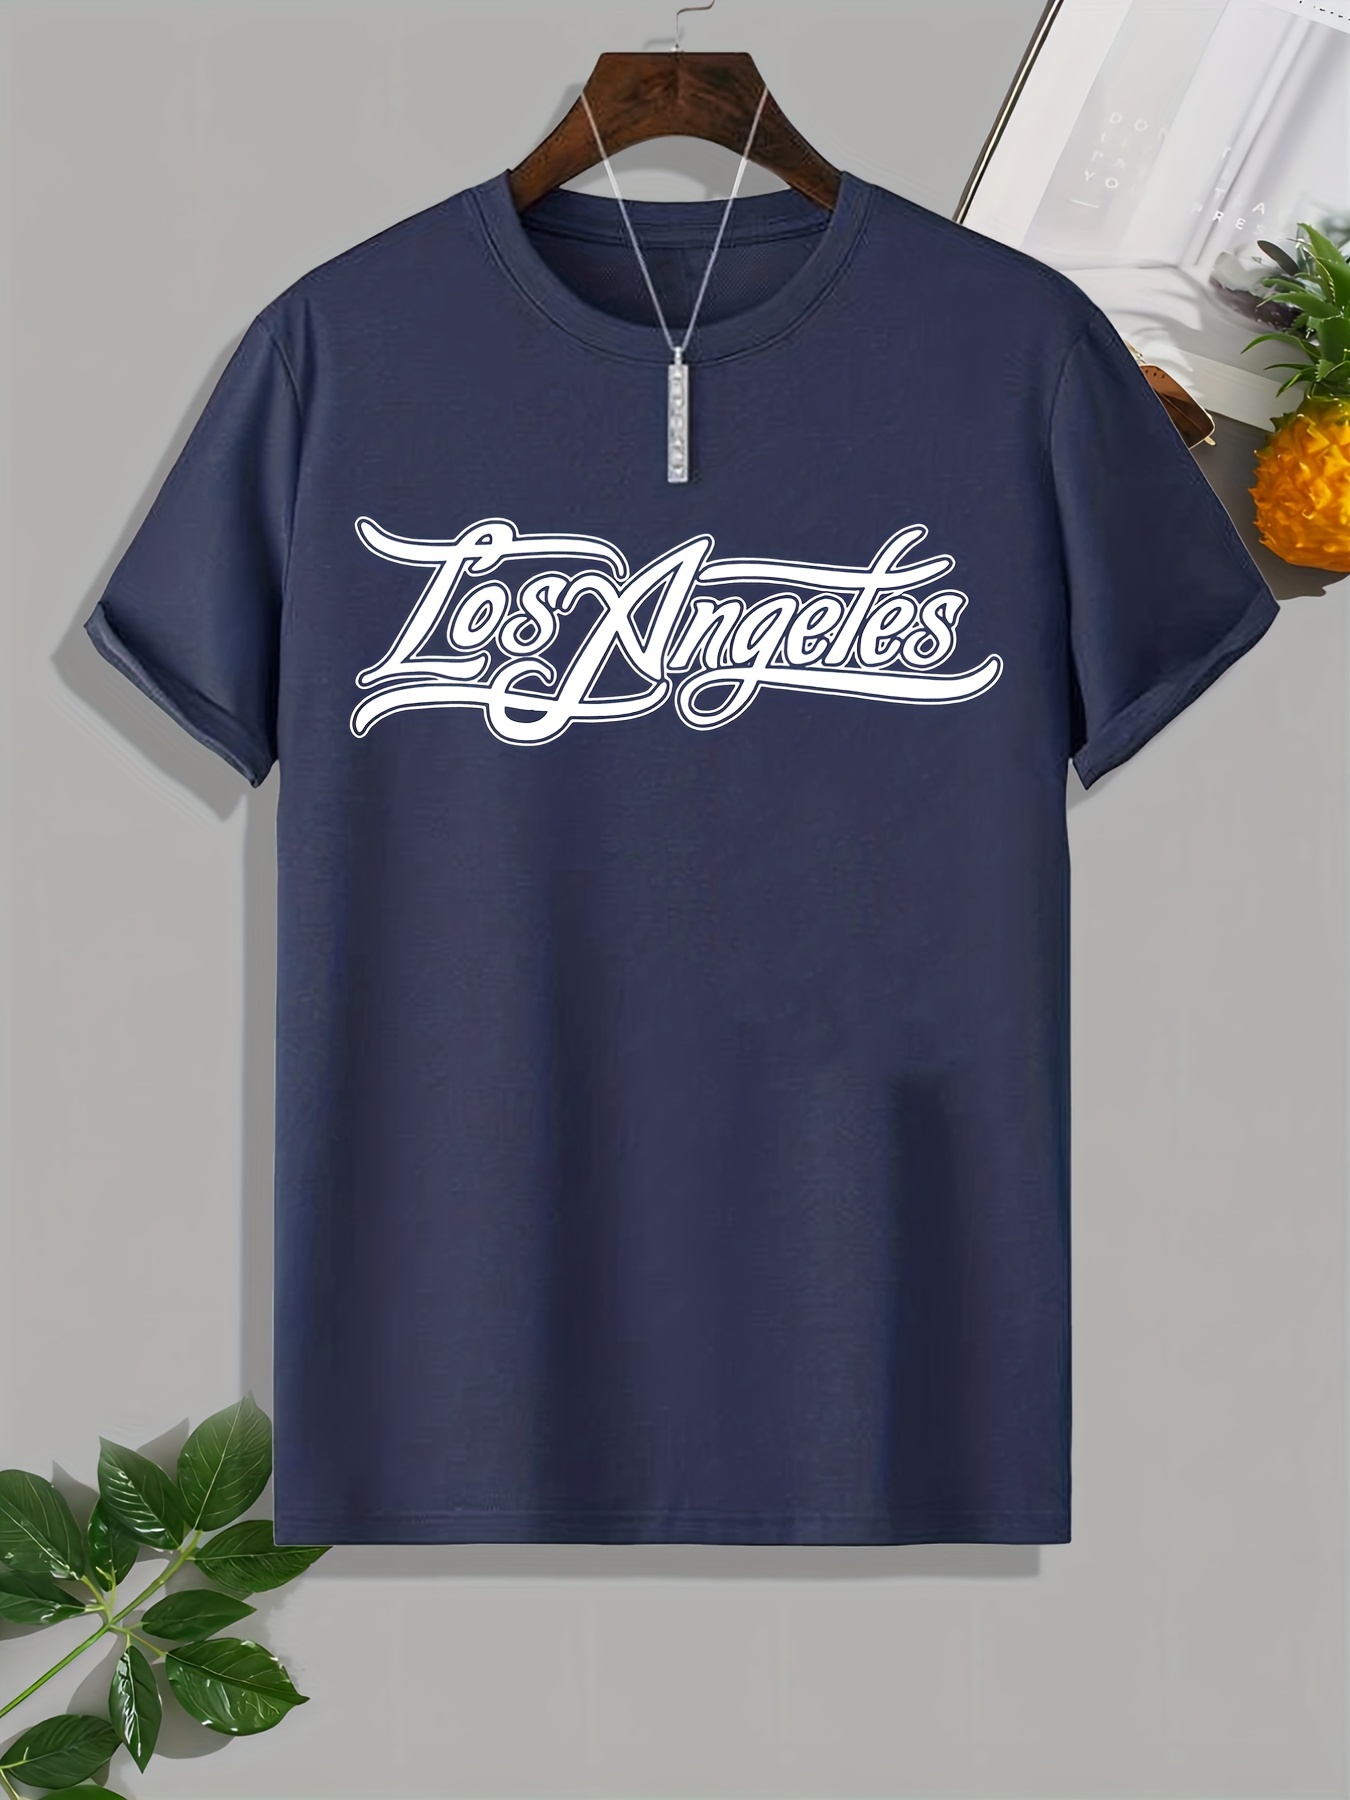 Los Angeles Apparel | Shirt for Men in Navy, Size XL